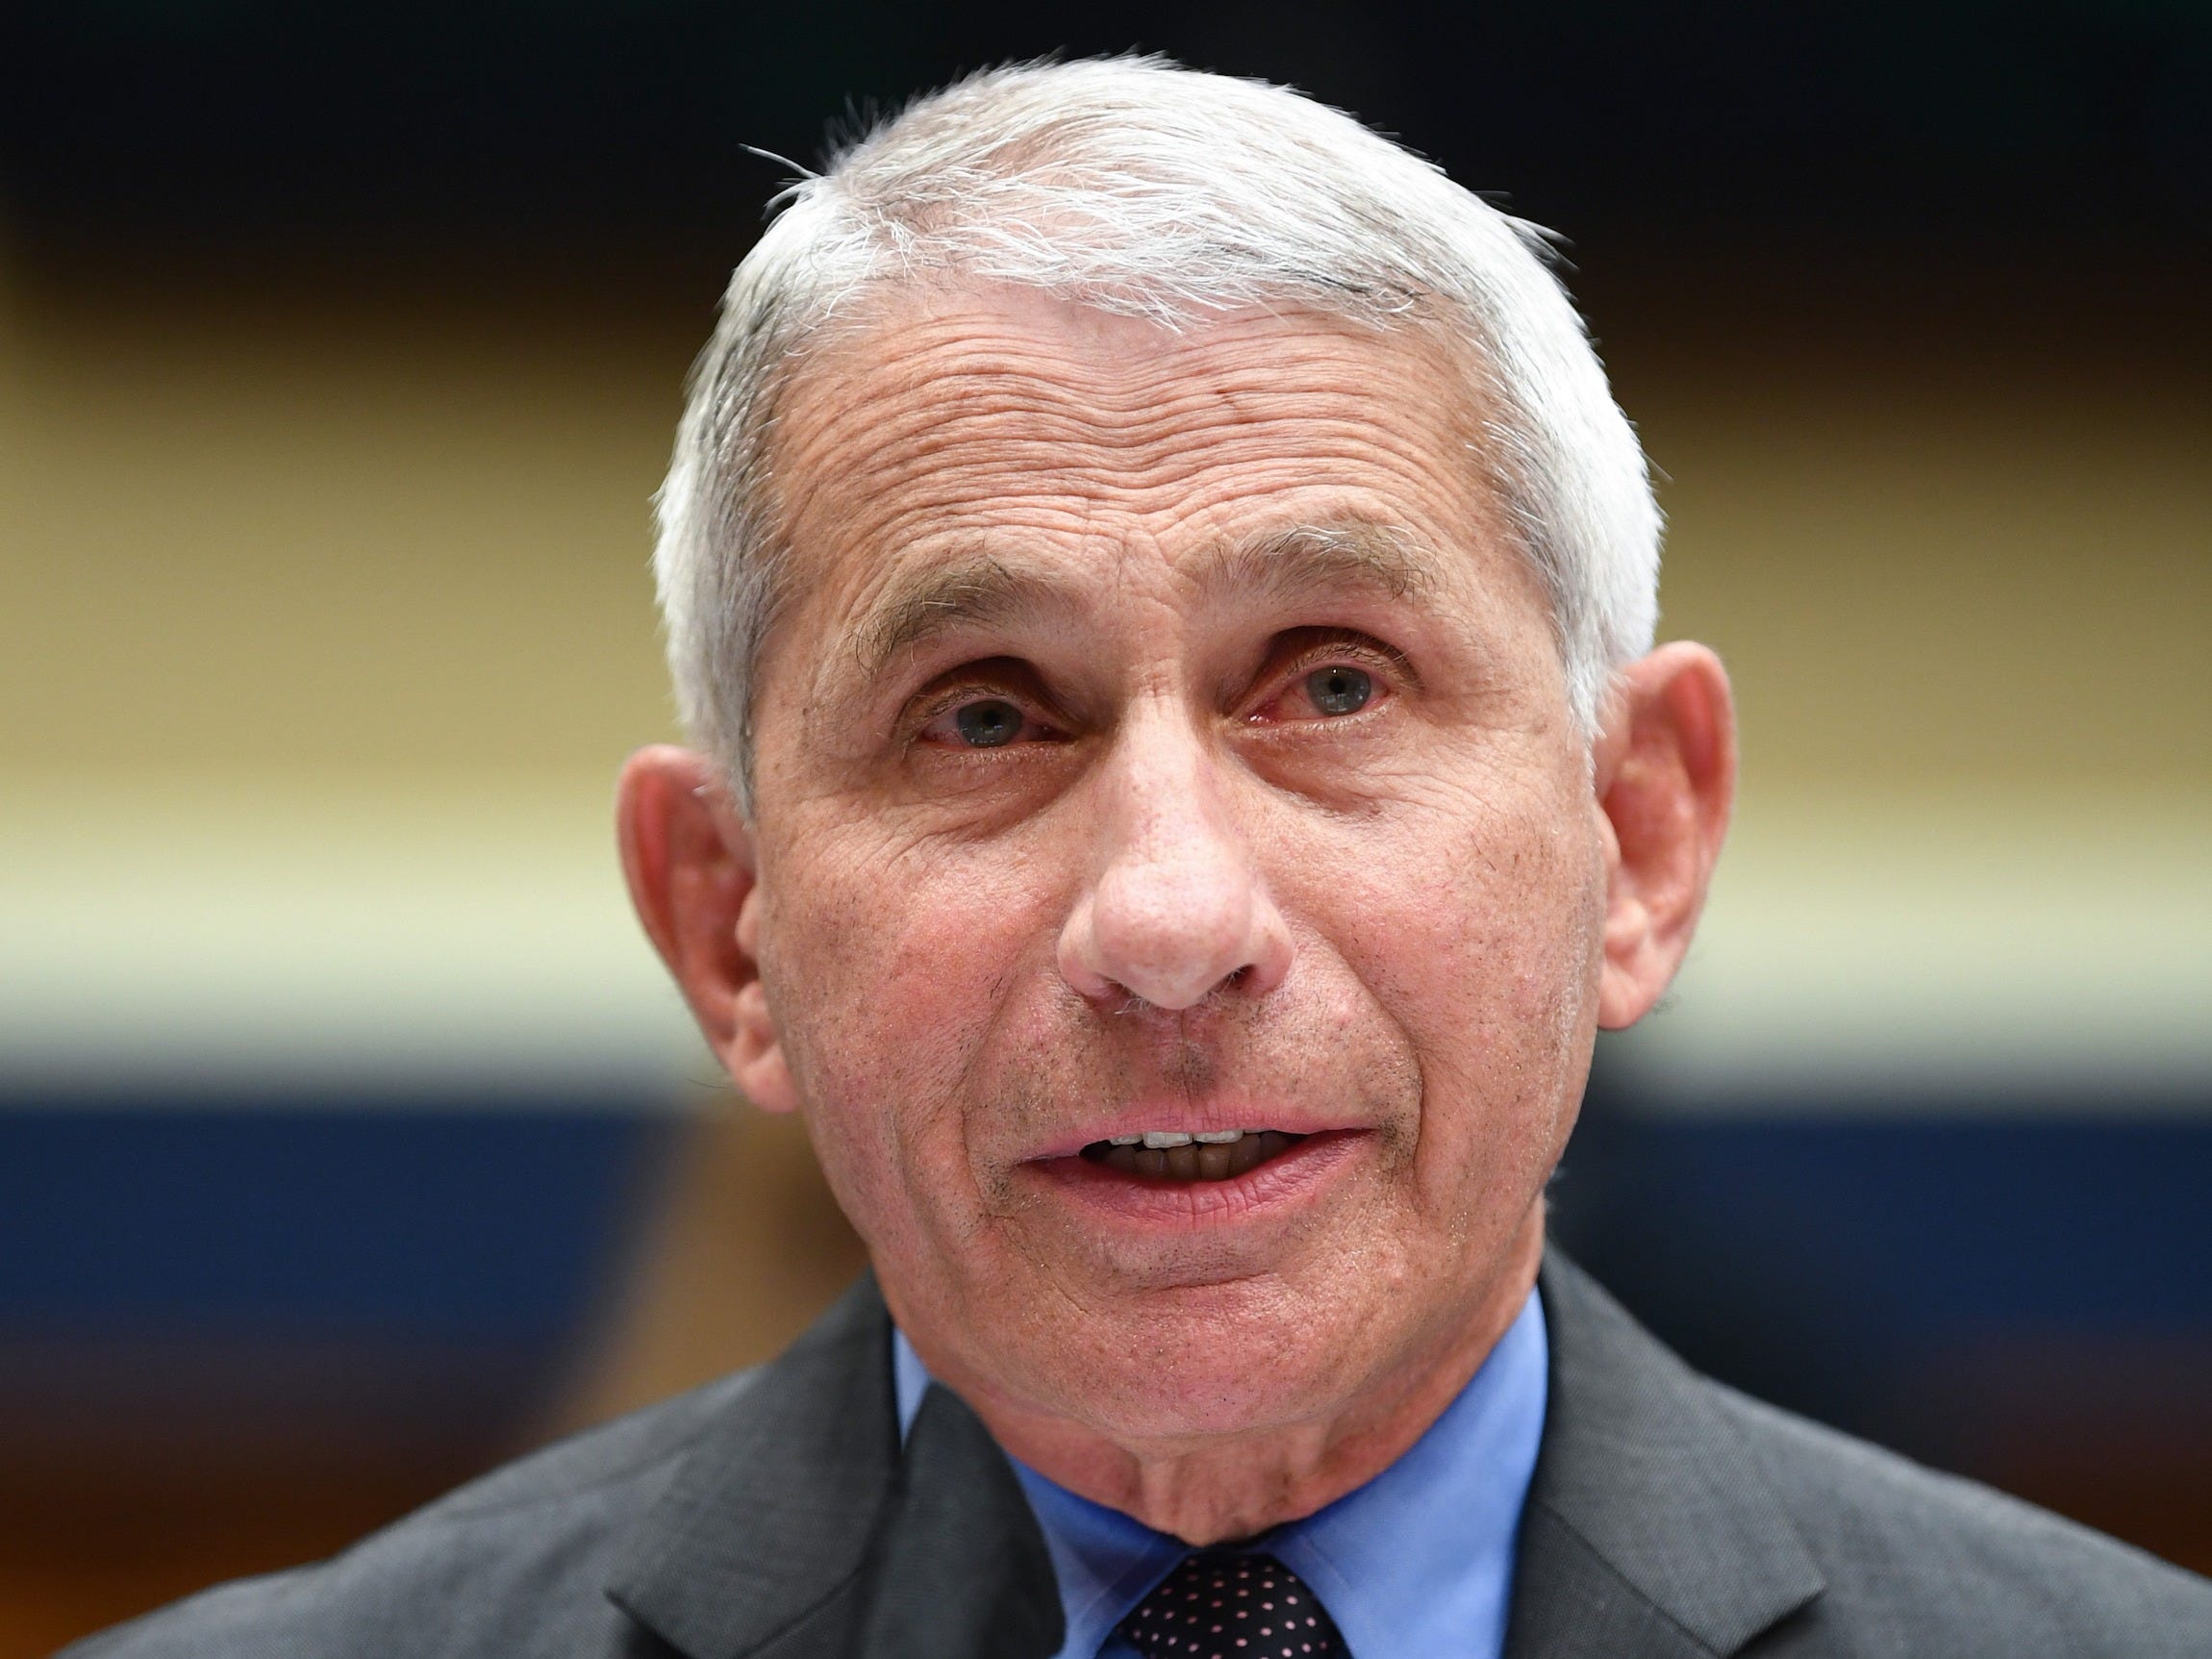 Dr. Anthony Fauci, Director of the National Institute for Allergy and Infectious Diseases, testifies before the US Senate Health, Education, Labor, and Pensions Committee hearing to examine COVID-19, "focusing on lessons learned to prepare for the next pandemic", on Capitol Hill in Washington, DC on June 23, 2020. (Image by Kevin Dietsch/AFP via Getty Images)